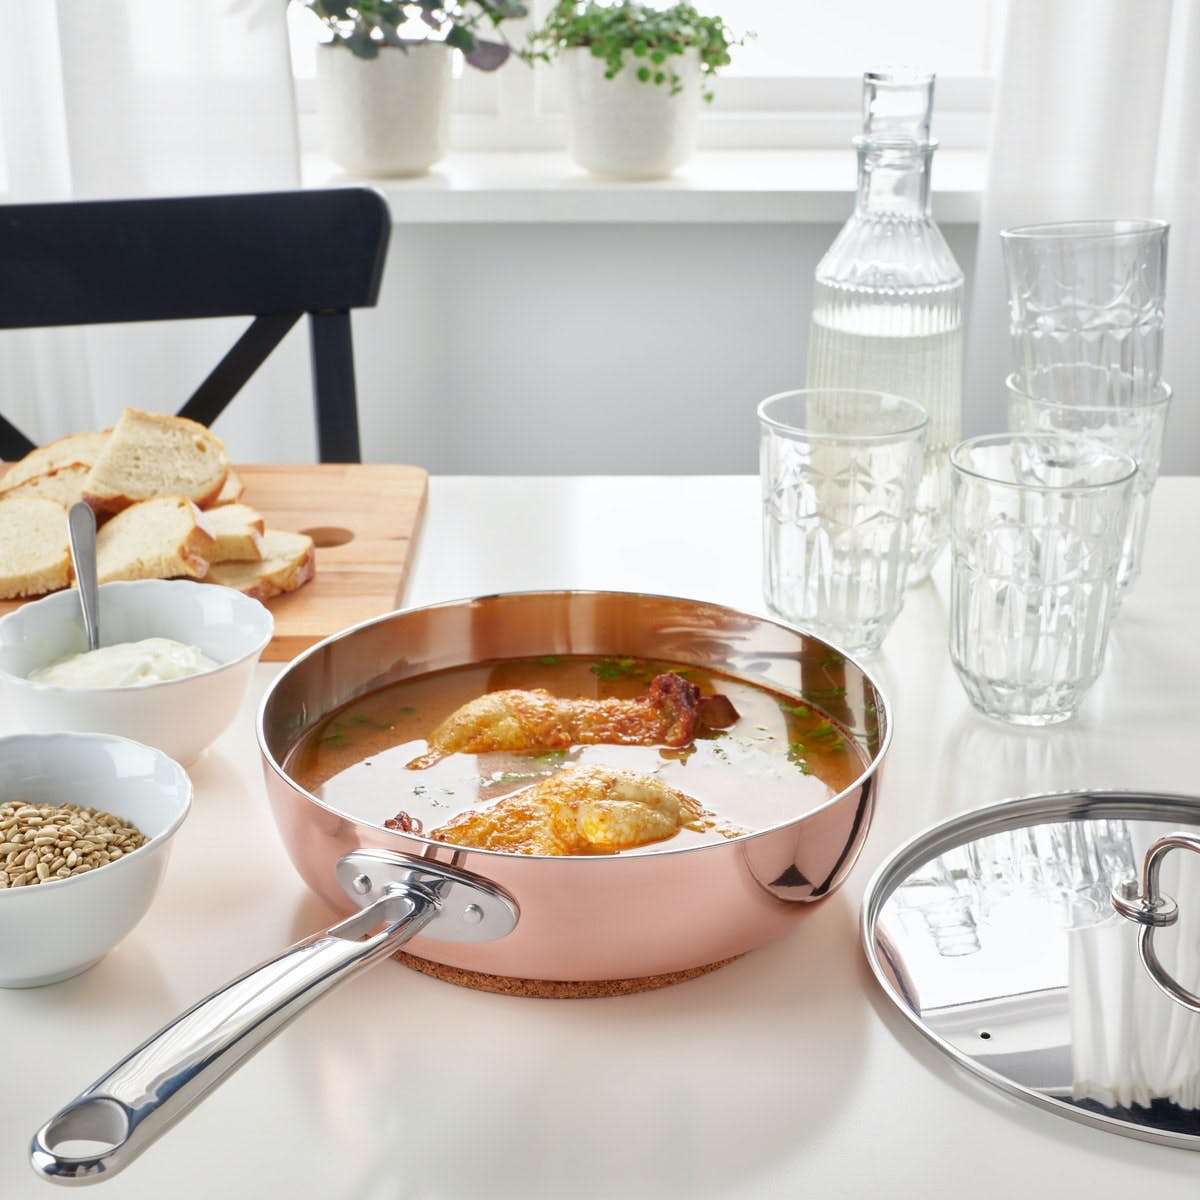 Ikea has launched a new collection of premium cookware